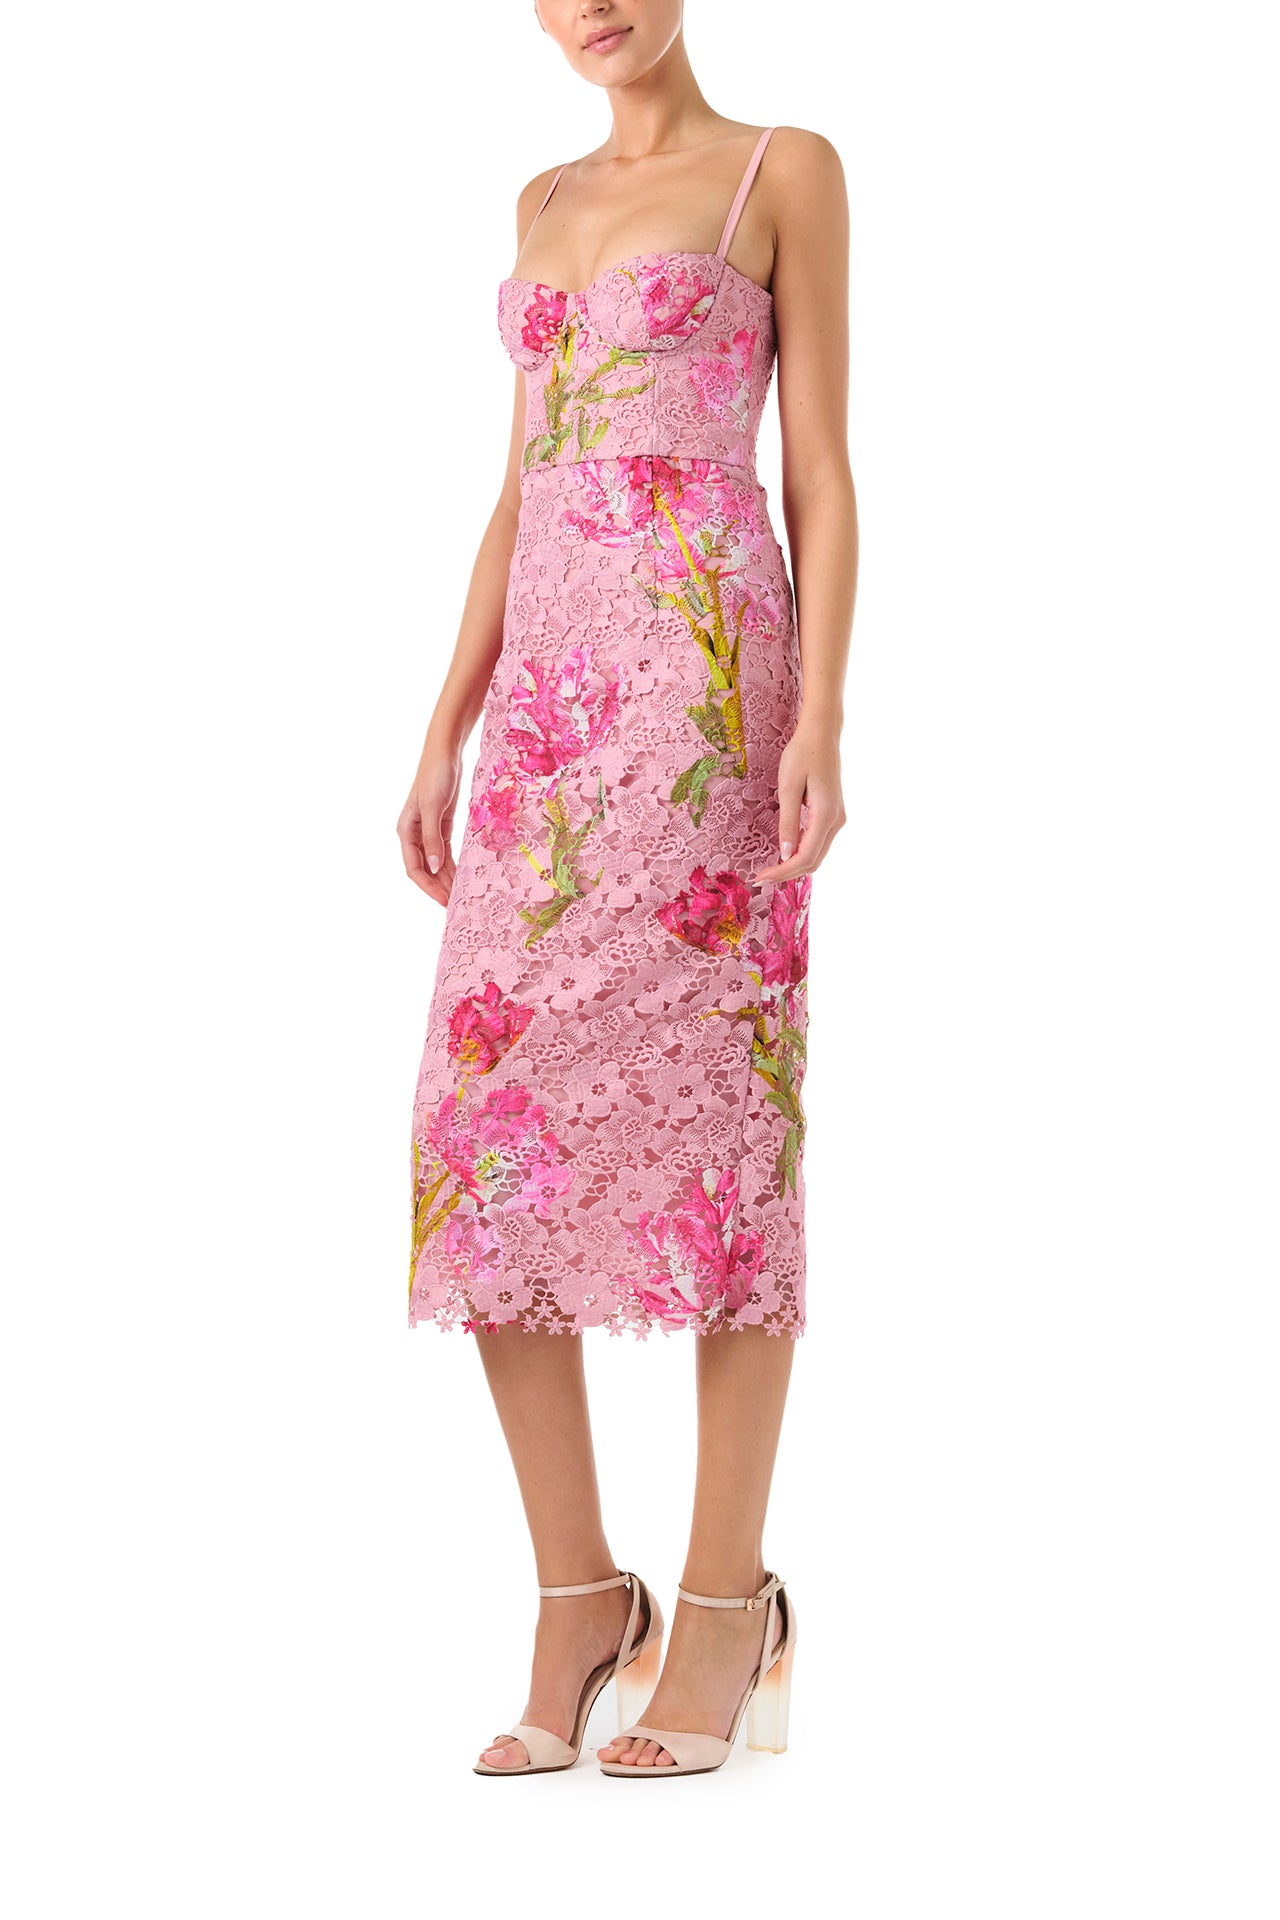 Monique Lhuillier Fall 2024 pink tulip printed lace midi dress with corseted bodice and spaghetti straps - side.